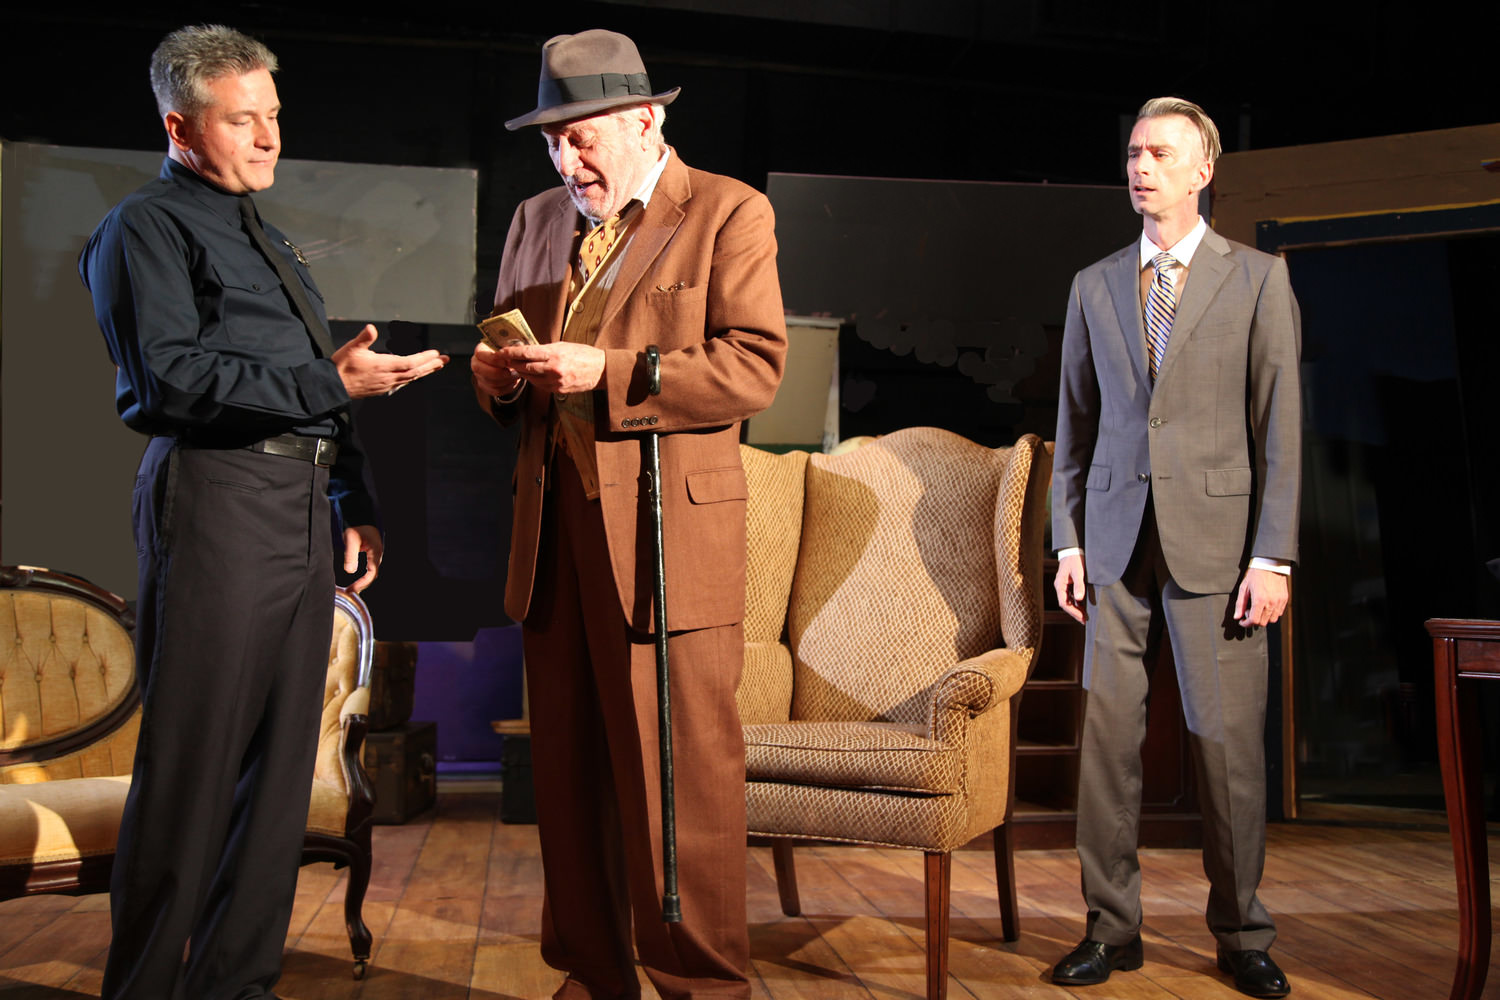 Rich Masotti, Frederic Tisch and Patrick Duffy in the production. 1